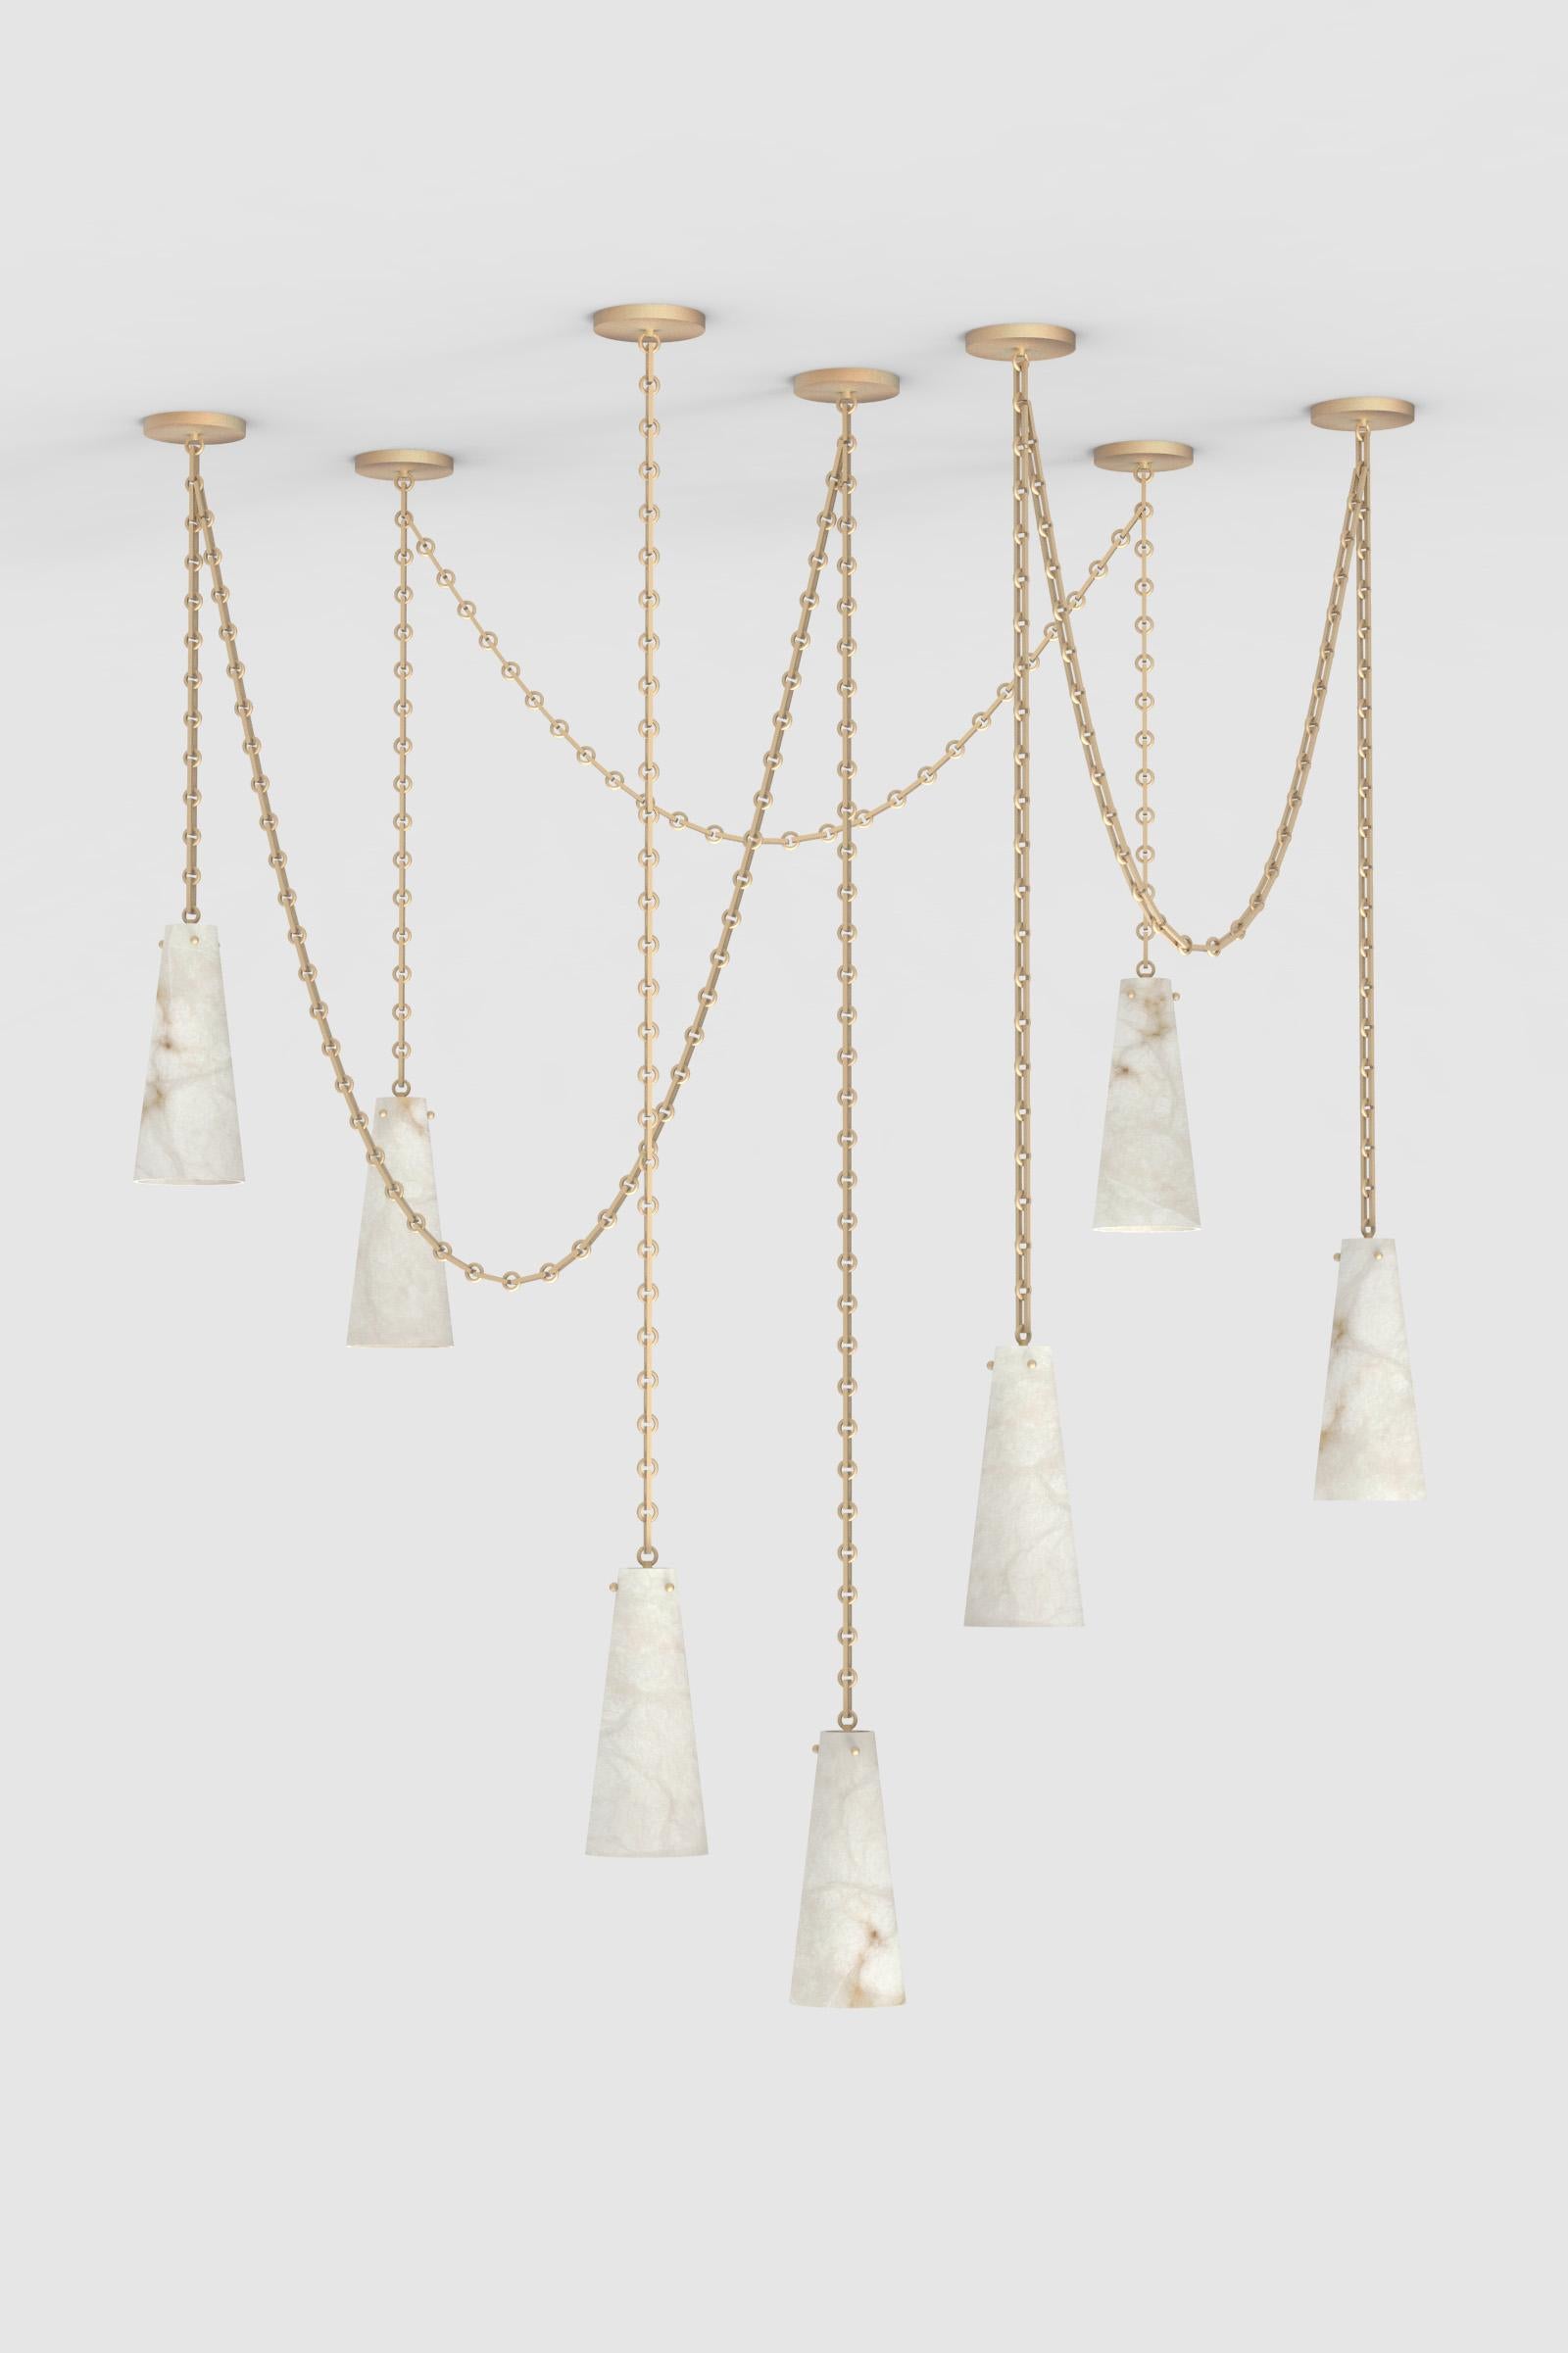 Orphan Work 202A-7 chandelier BB, 2021
Shown in alabaster with brushed brass
Available in brushed brass and blackened brass
Measures: 15” H x 6 1/2” W
height and width to order*
canopy 6